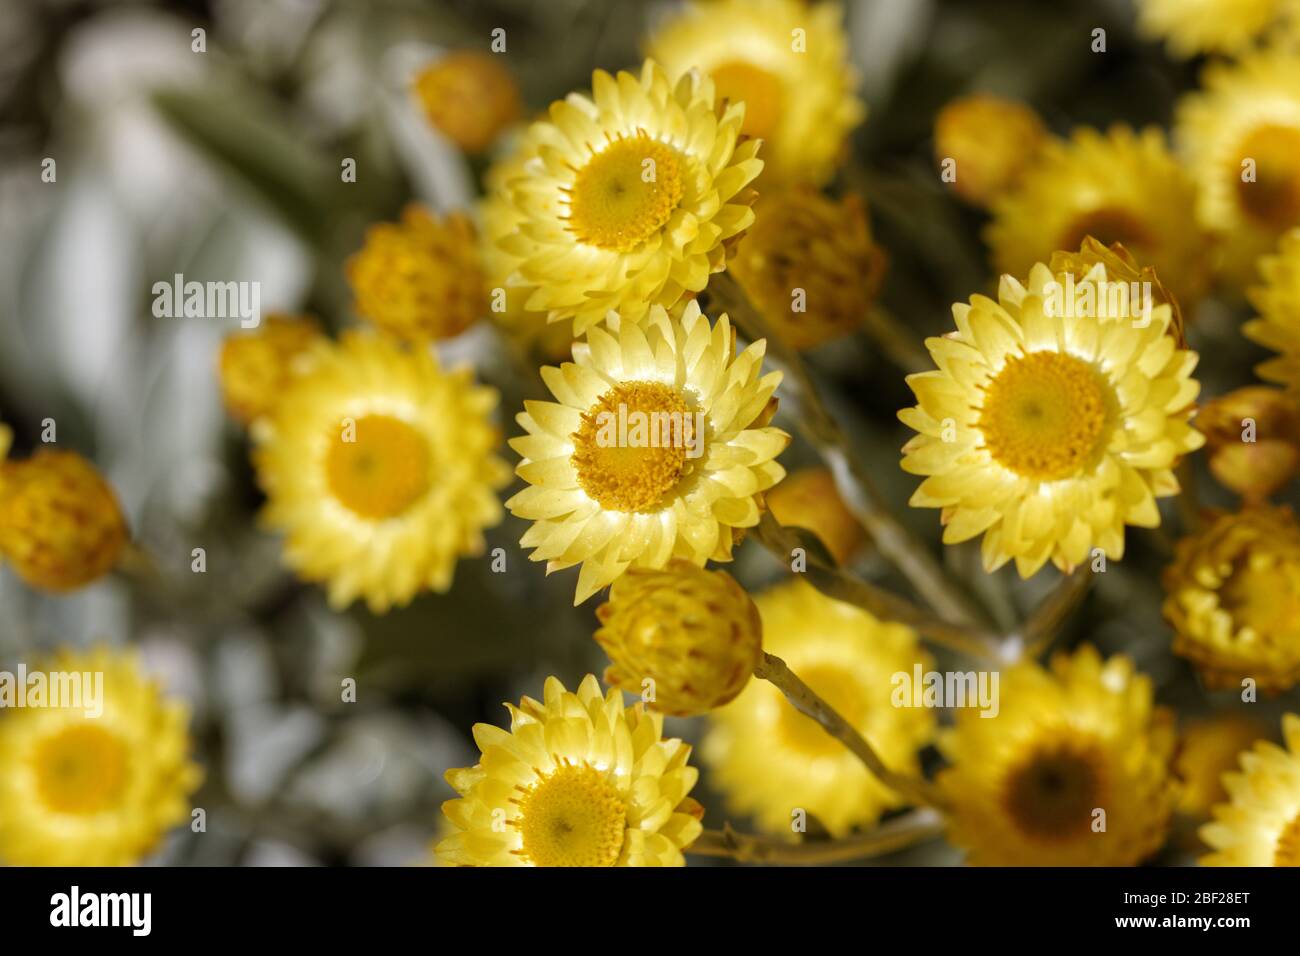 Helichrysum argyrophylla.  The flowers are daisy-like with canary yellow rays surrounding a darker yellow centre, flowering from December to May. Stock Photo